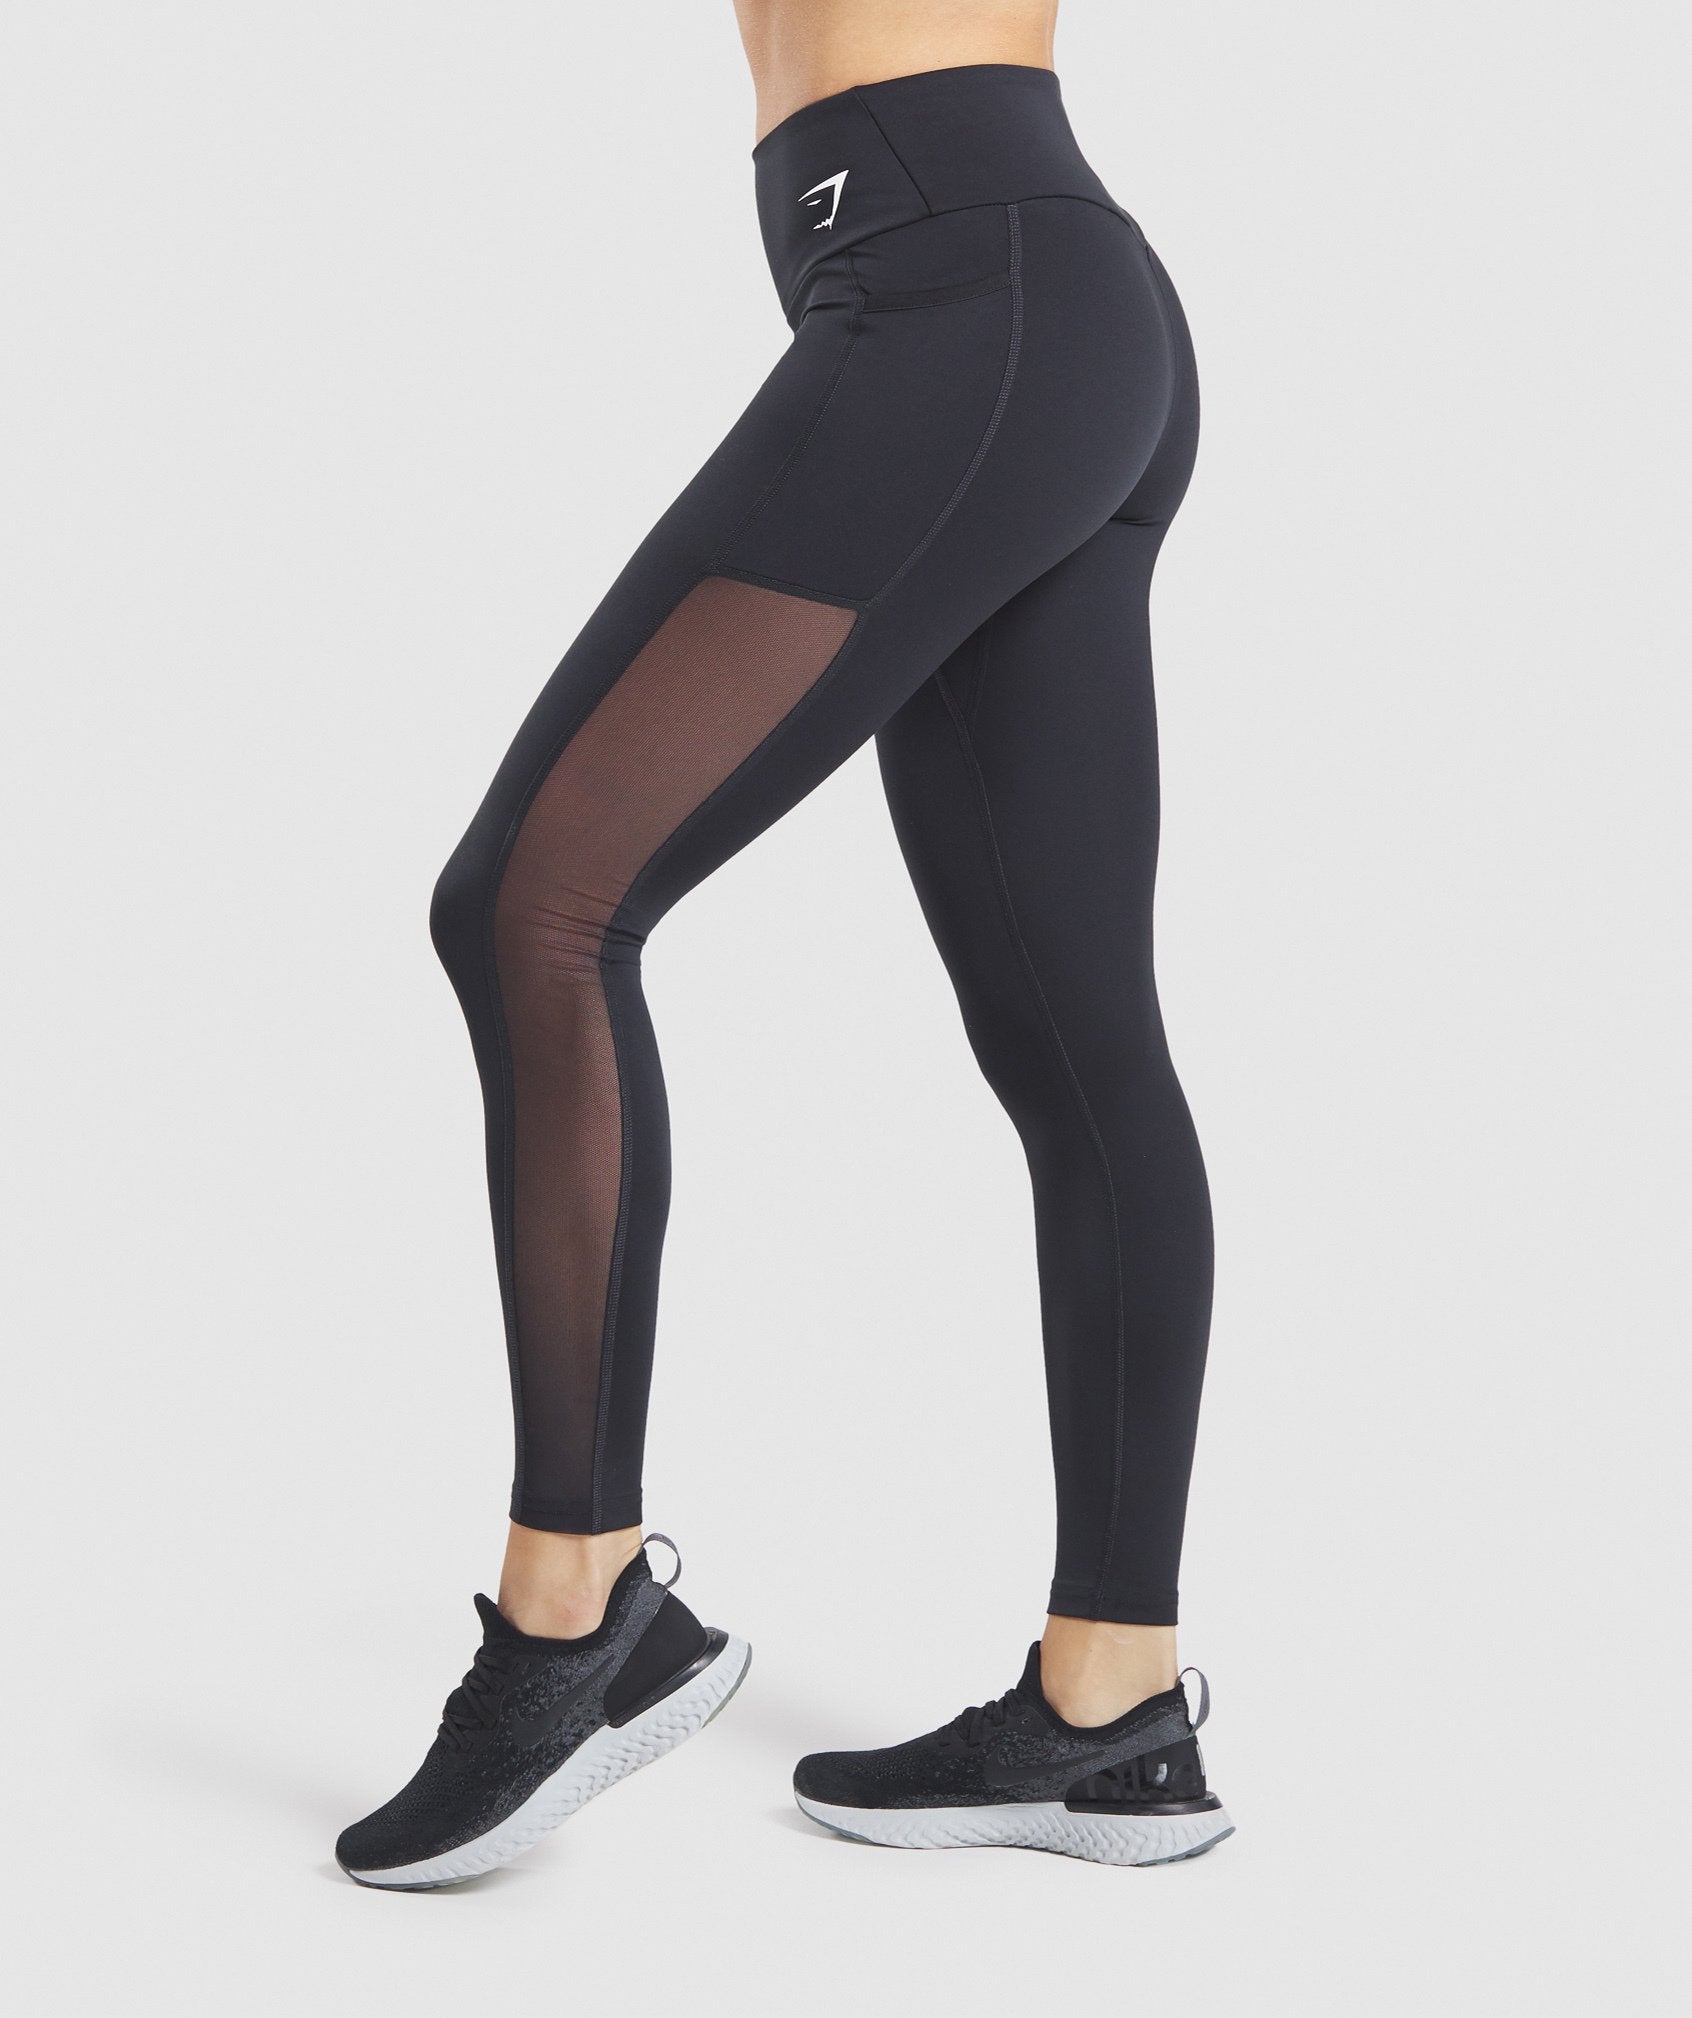 Ecomove and Mesh High-Rise Legging with Pockets - Black